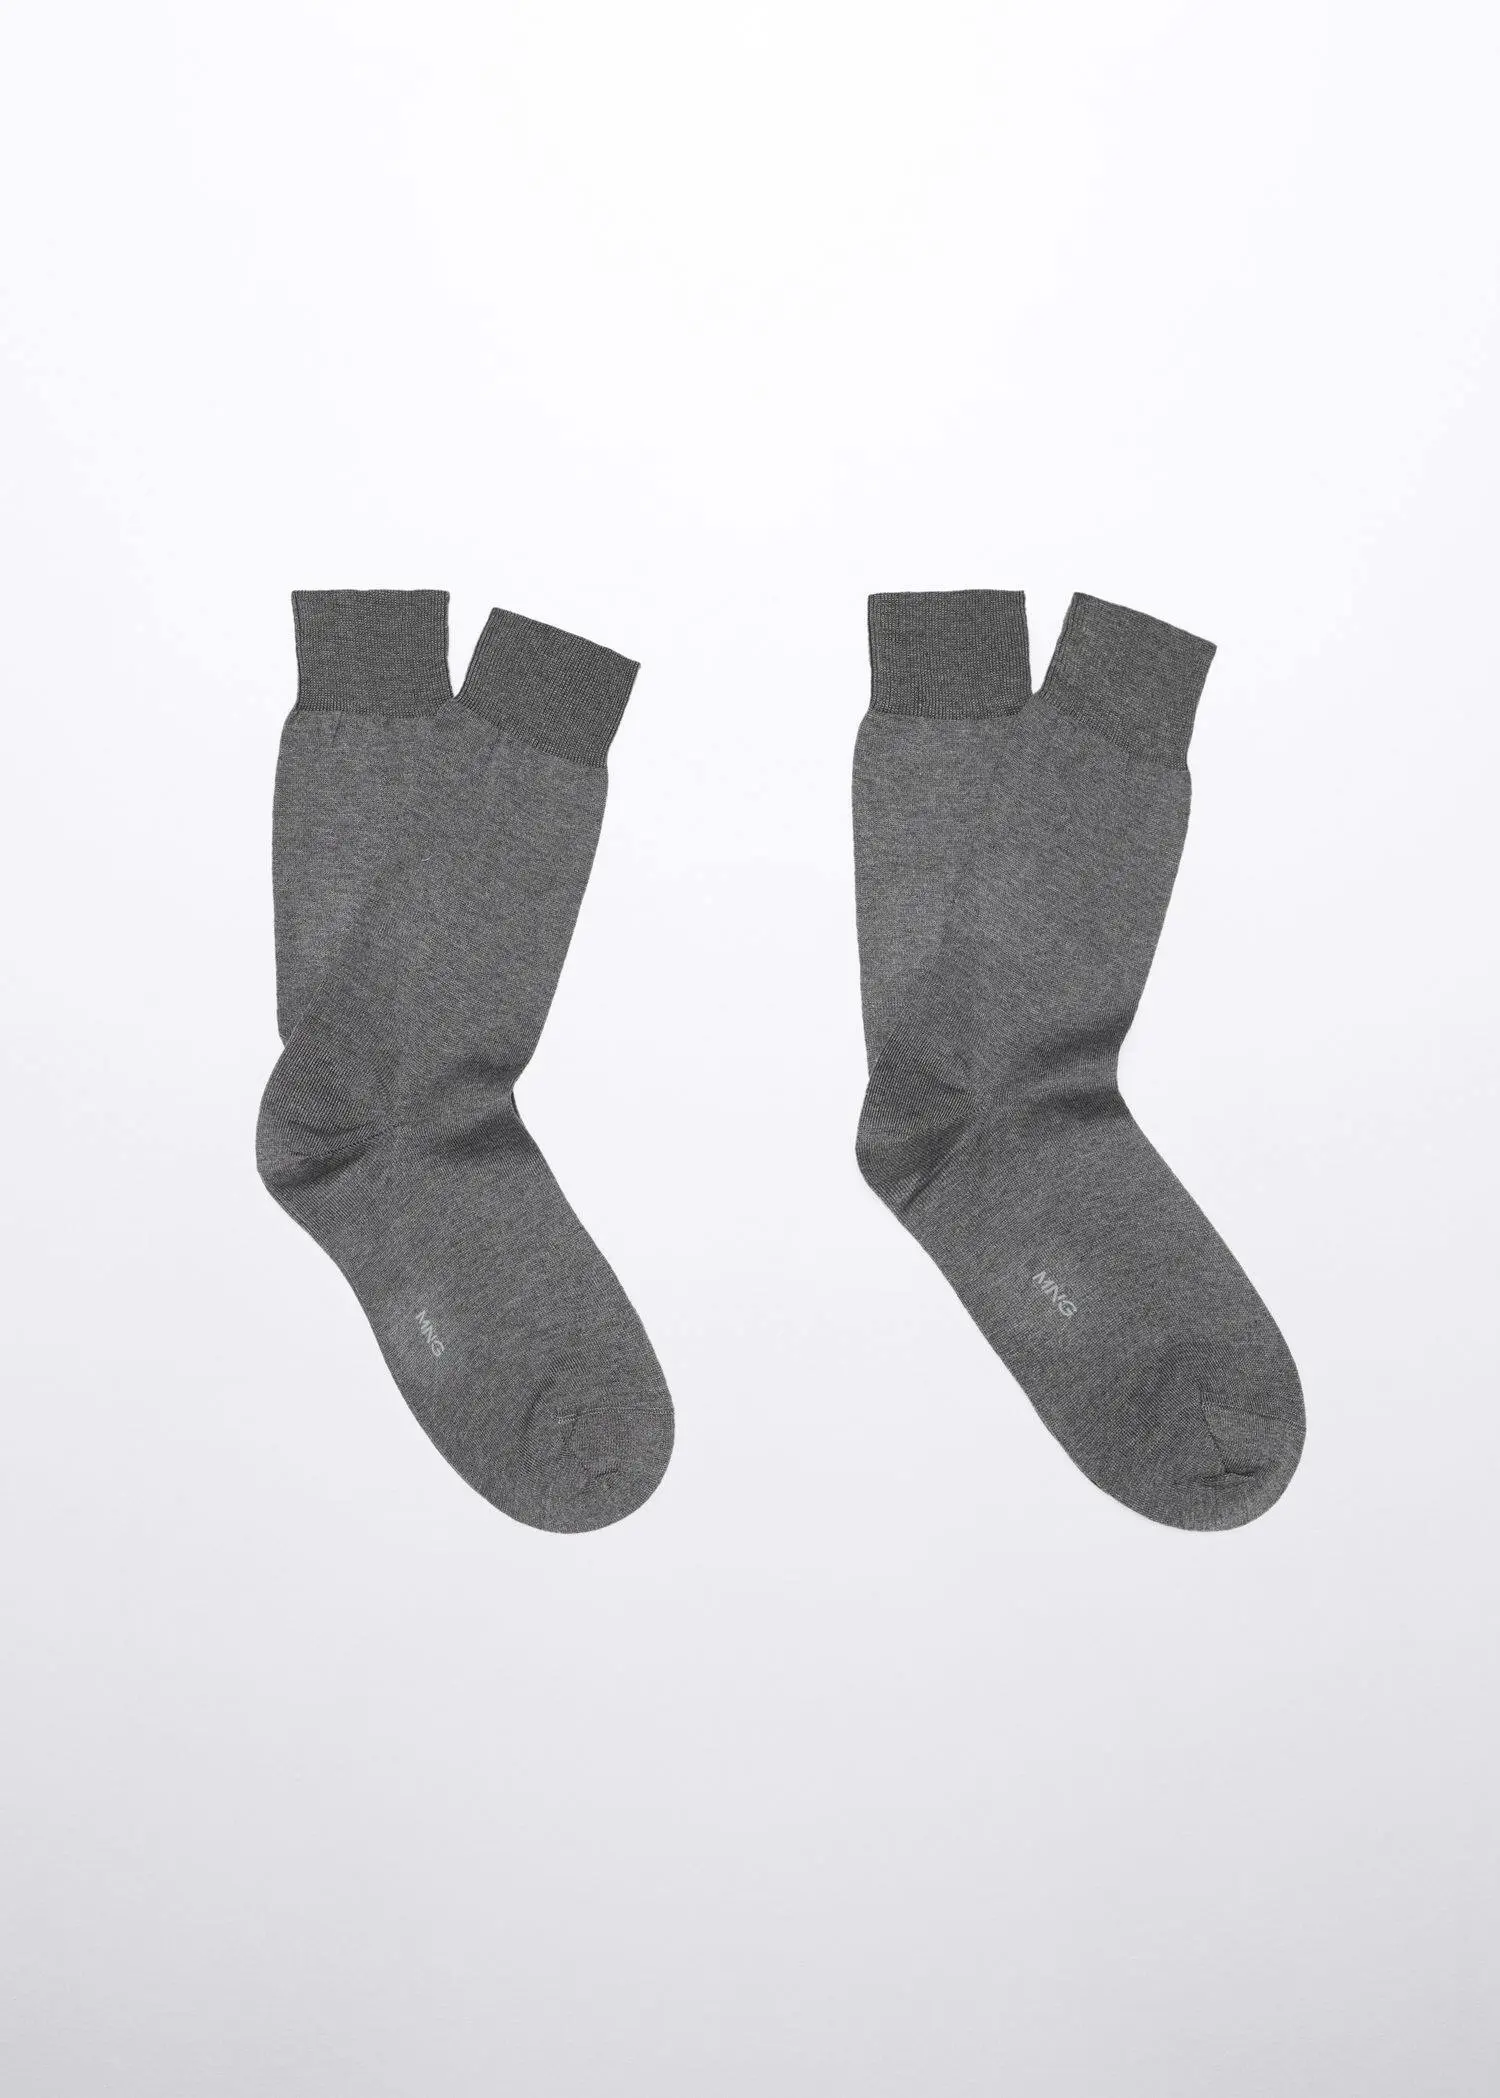 Mango Pack of 2 100% plain cotton socks. a pair of grey socks on a white background 